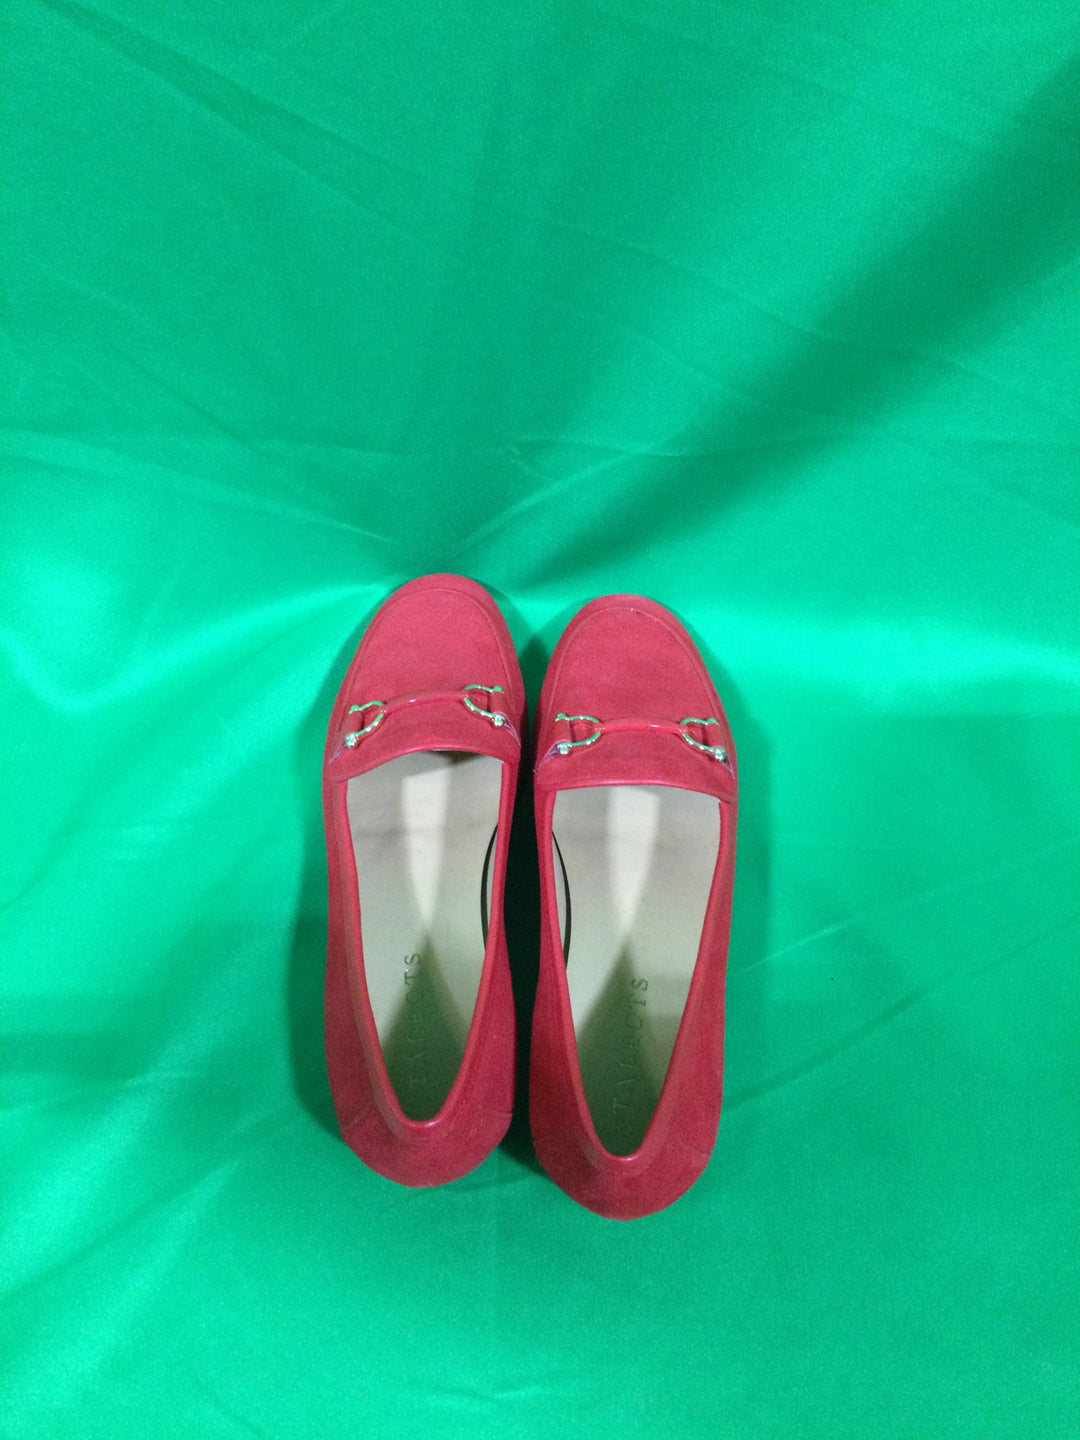 Talbots Women's Size 6 1/2 M Red Loafers - The Kennedy Collective Thrift - 